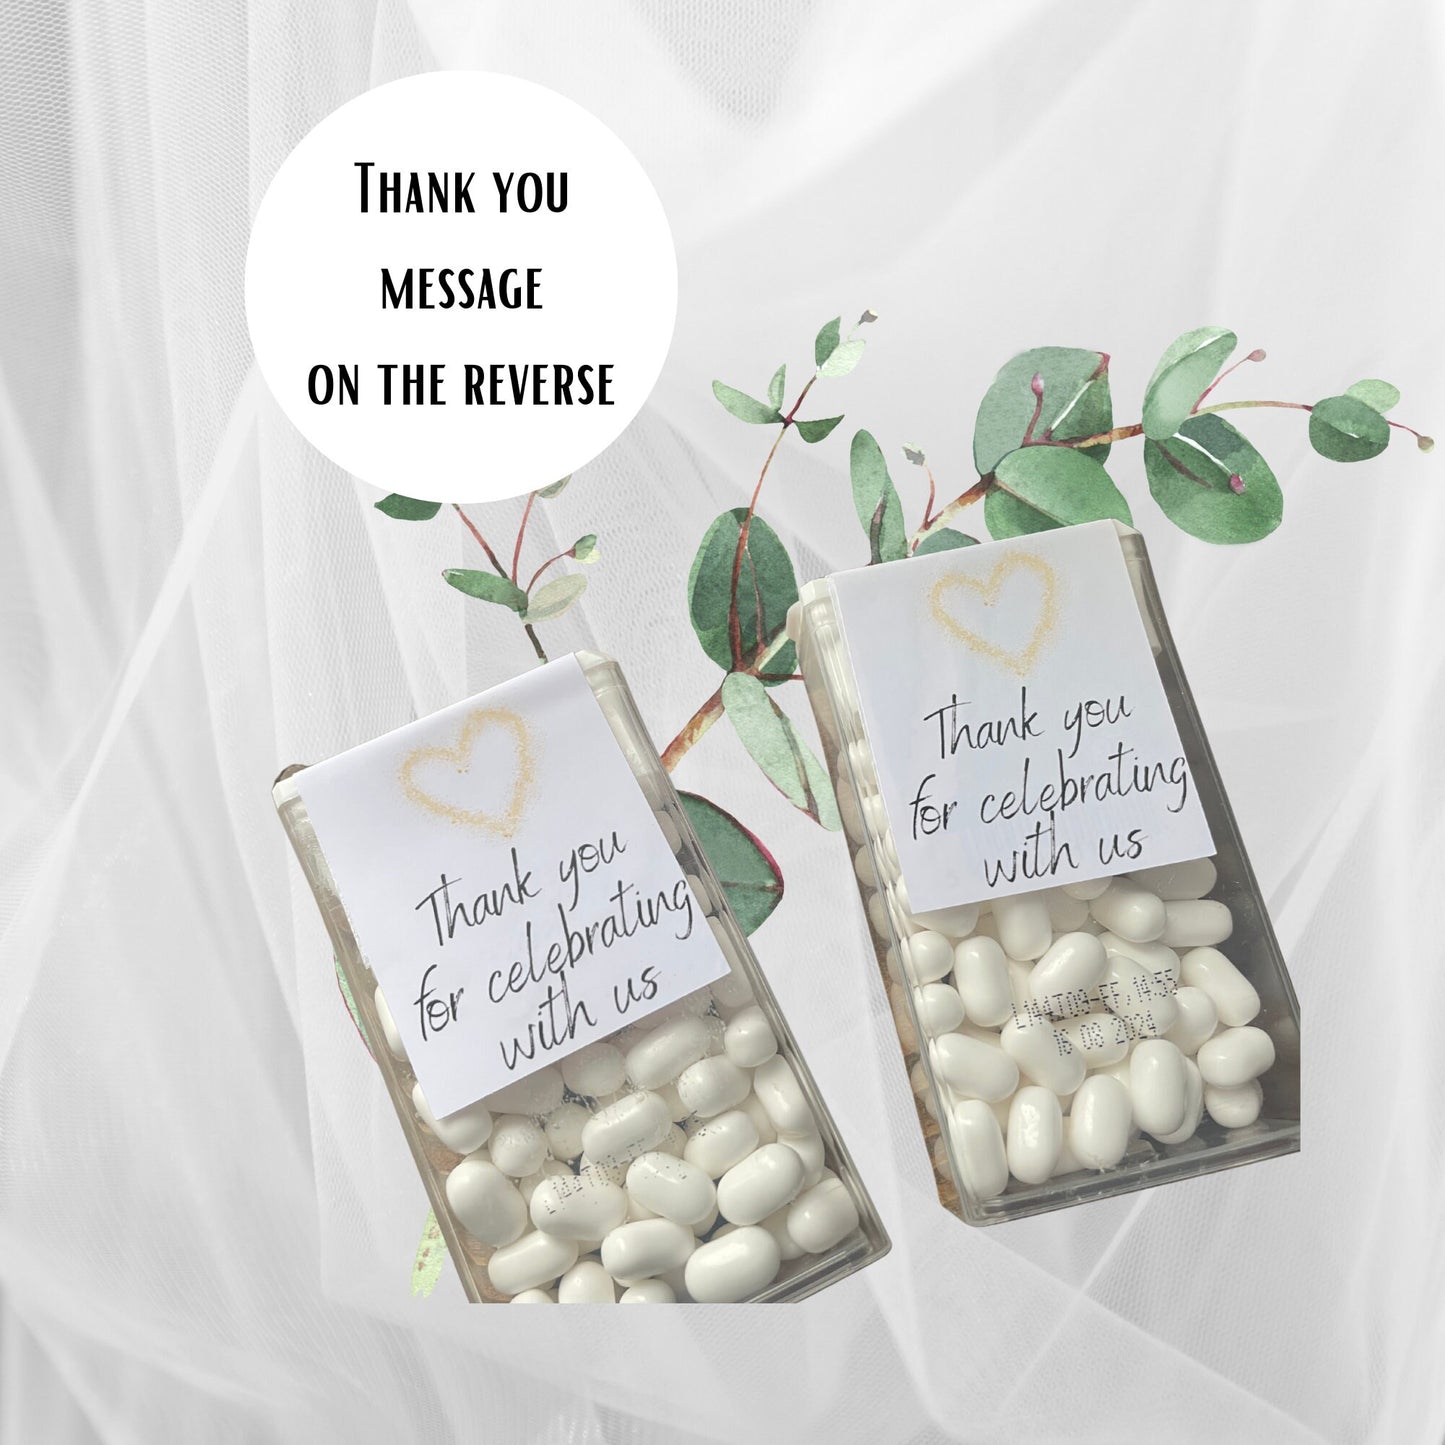 Personalised DIY "We Made a Commit-Mint" Tic Tacs Wedding Favour Stickers